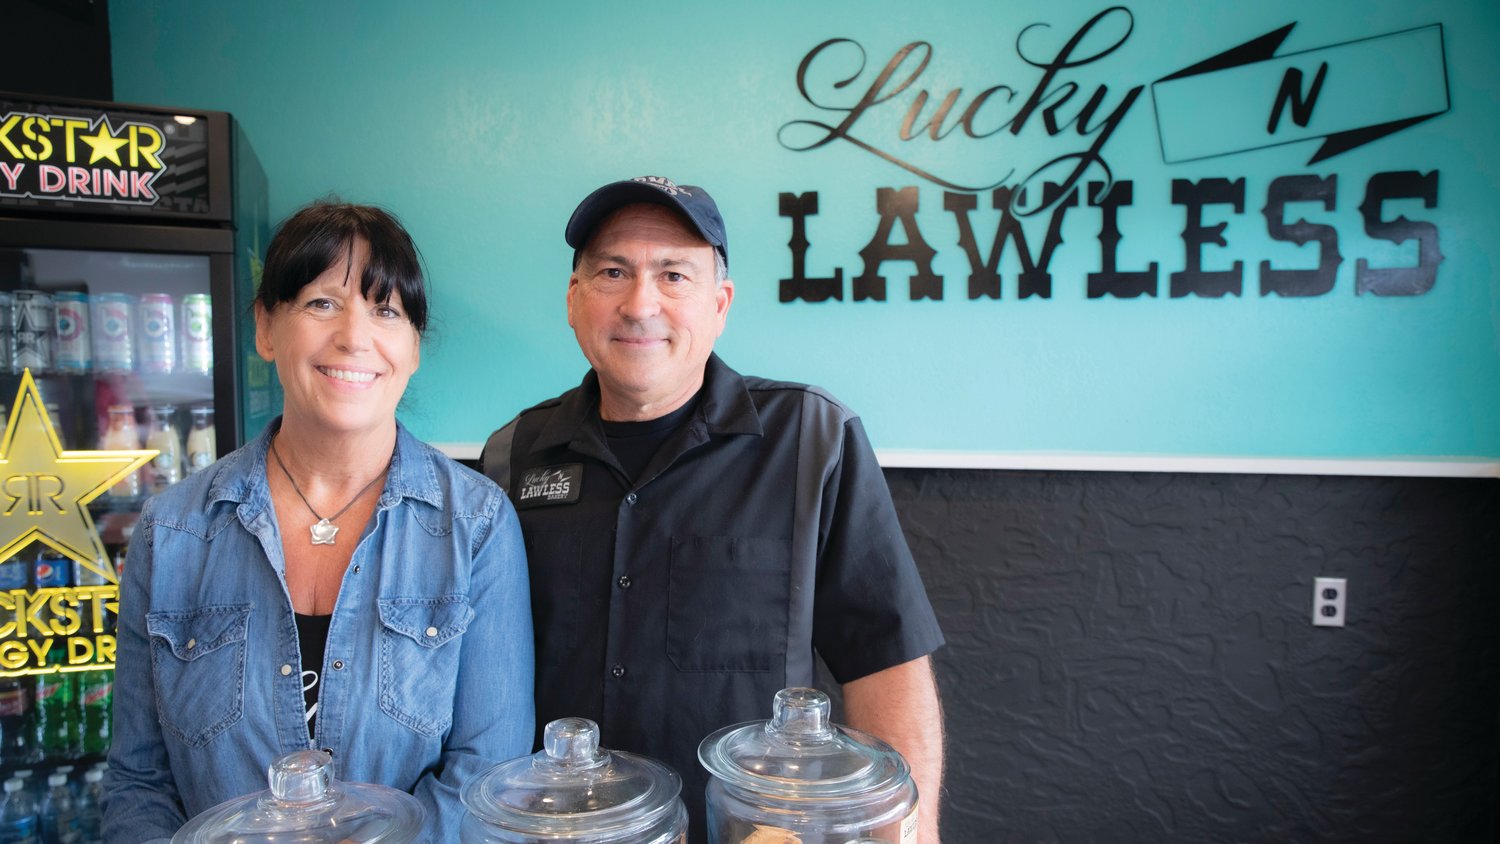 Pam and Steven Kaiser smile for a photo inside the Lucky 'N Lawless Bakery Friday afternoon in Centralia.